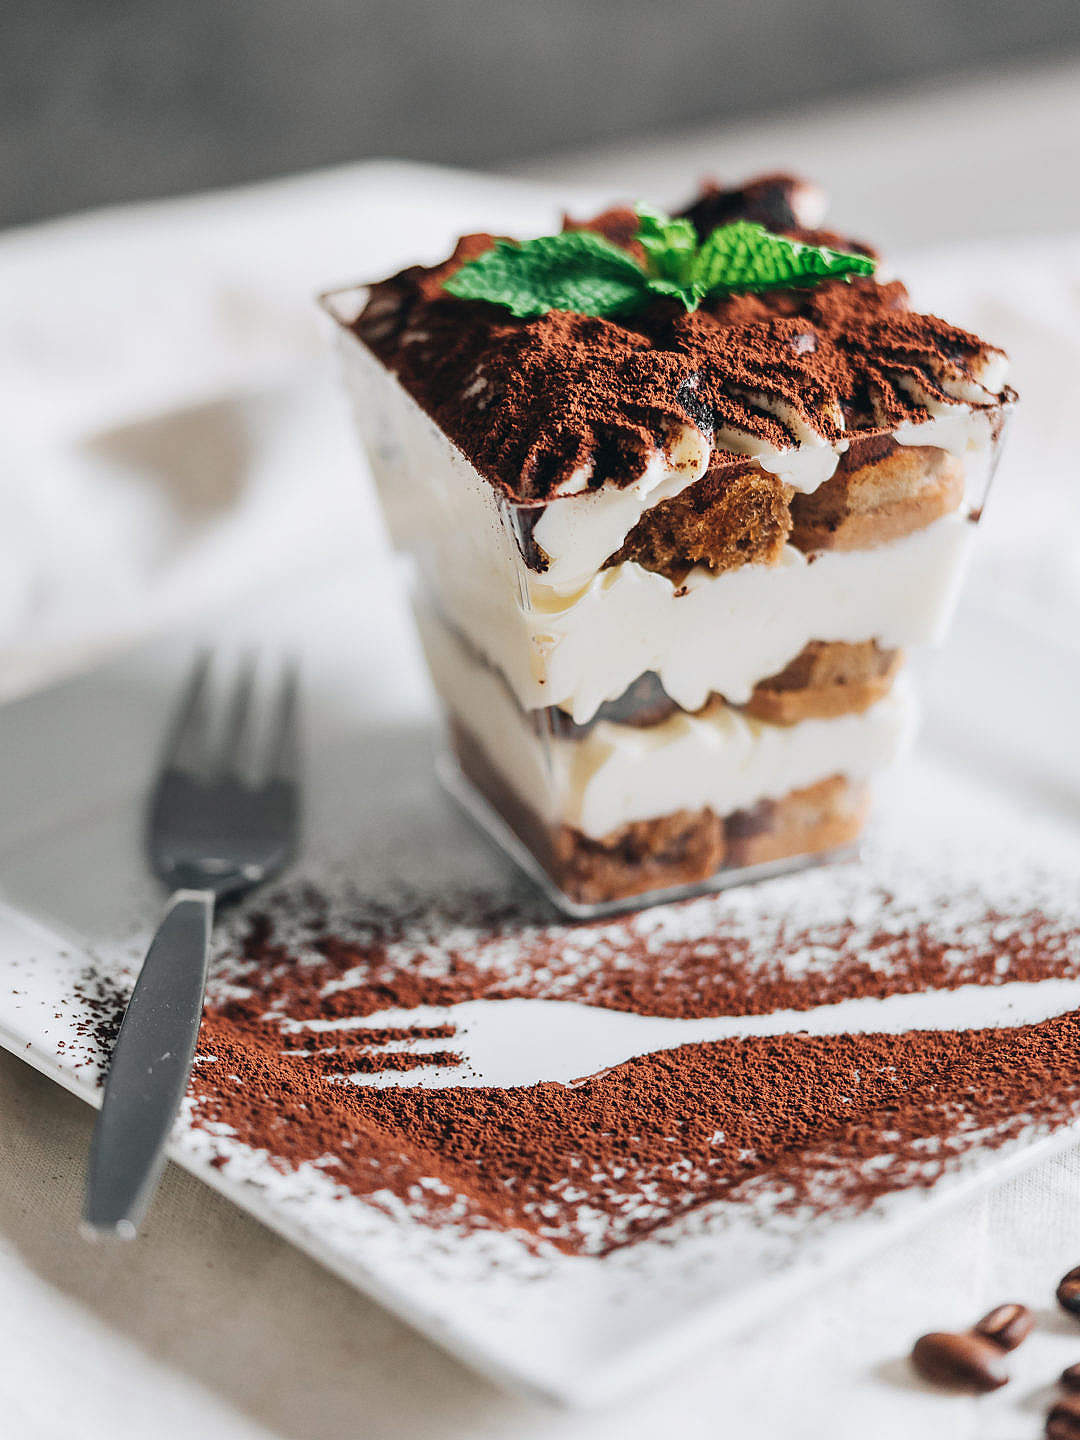 Tiramisu Served with Fork Outline Dusted with Cocoa Powder